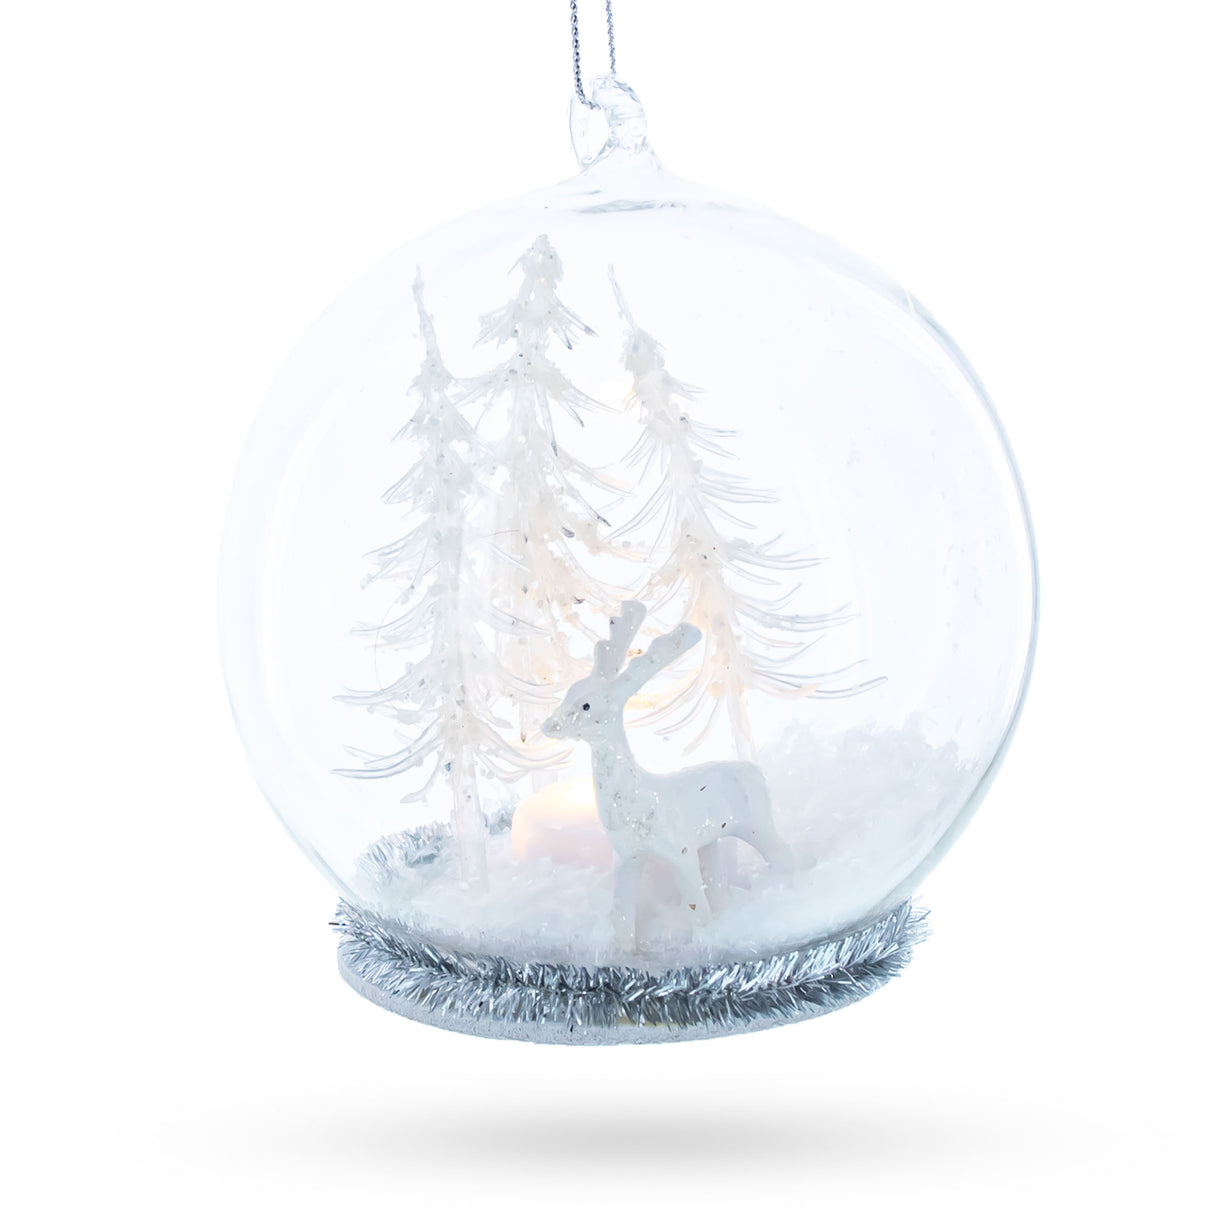 Glass White Deer in Snow Globe with Glistening Snowflakes - Blown Glass Christmas Ornament in White color Round